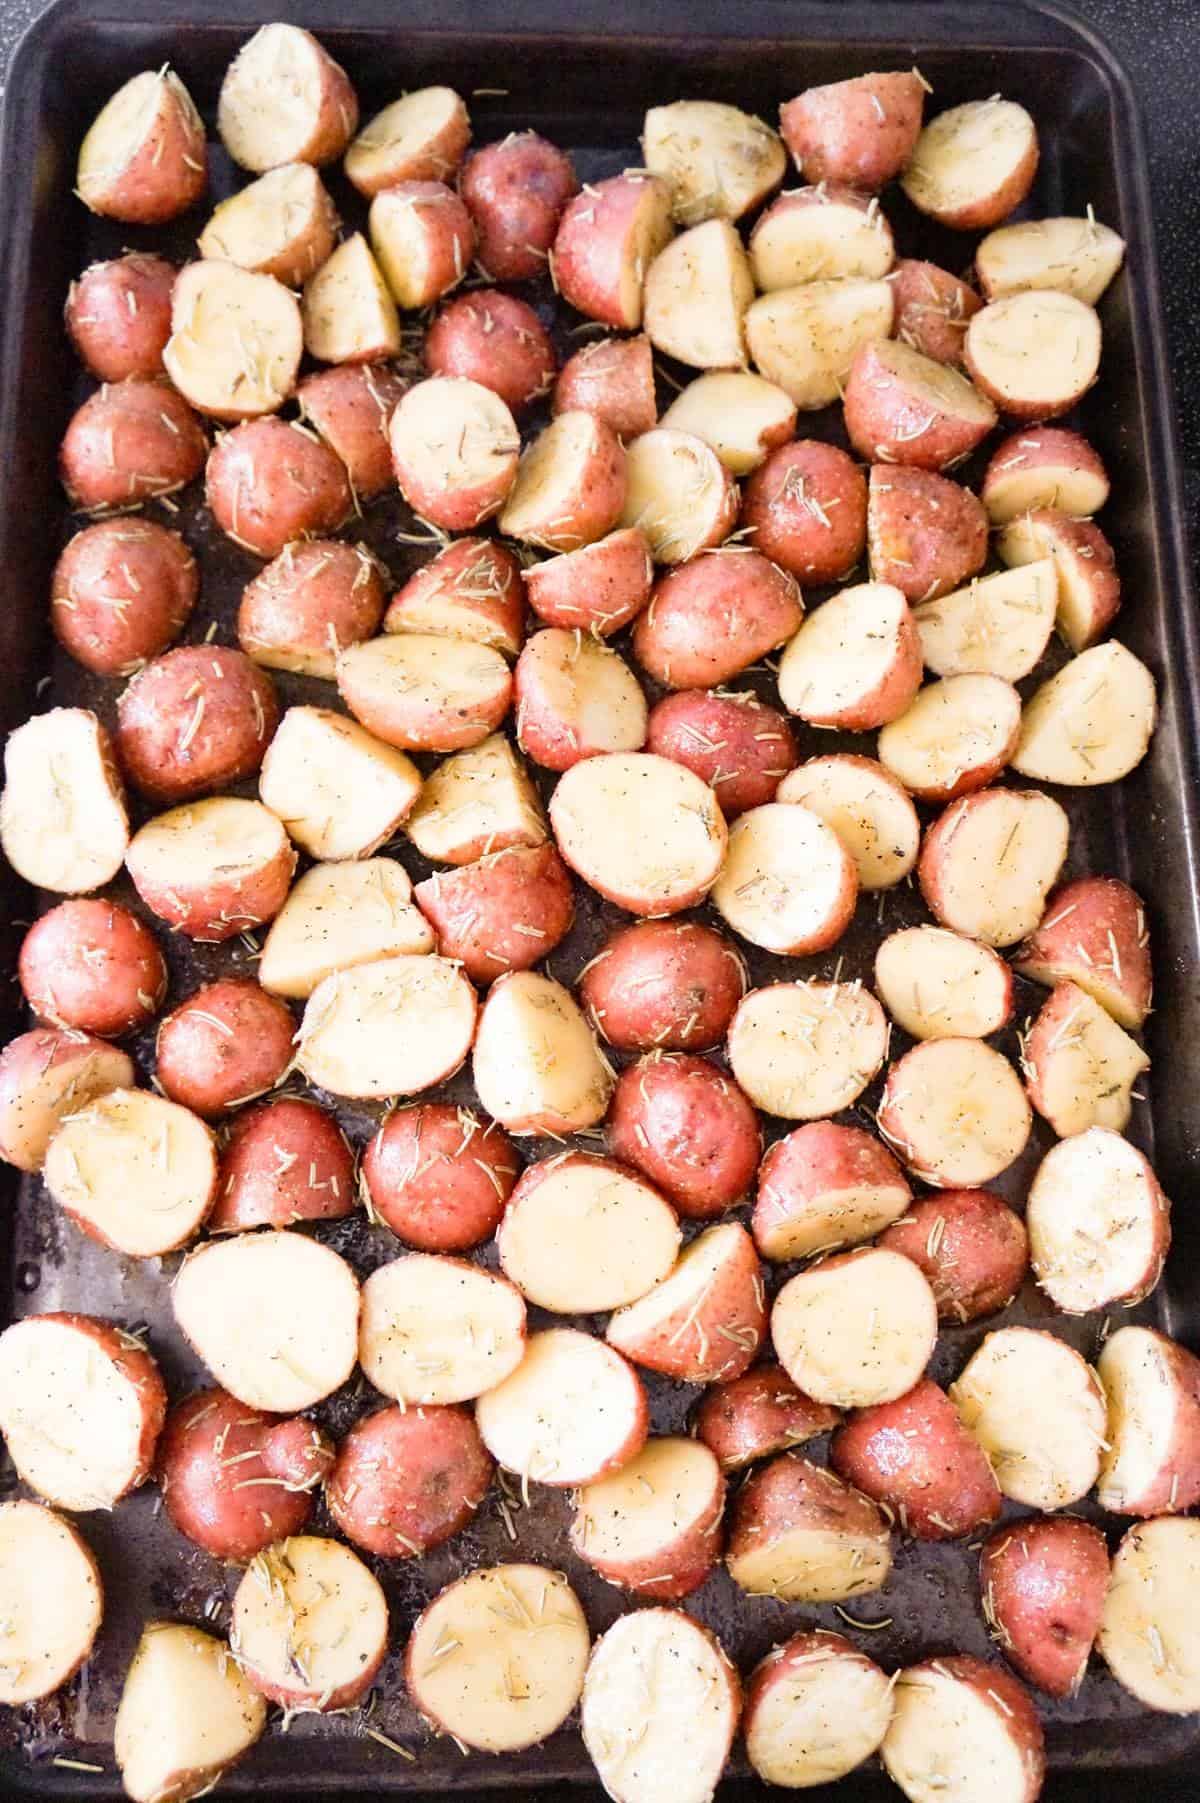 chopped red potatoes on a pan before baking